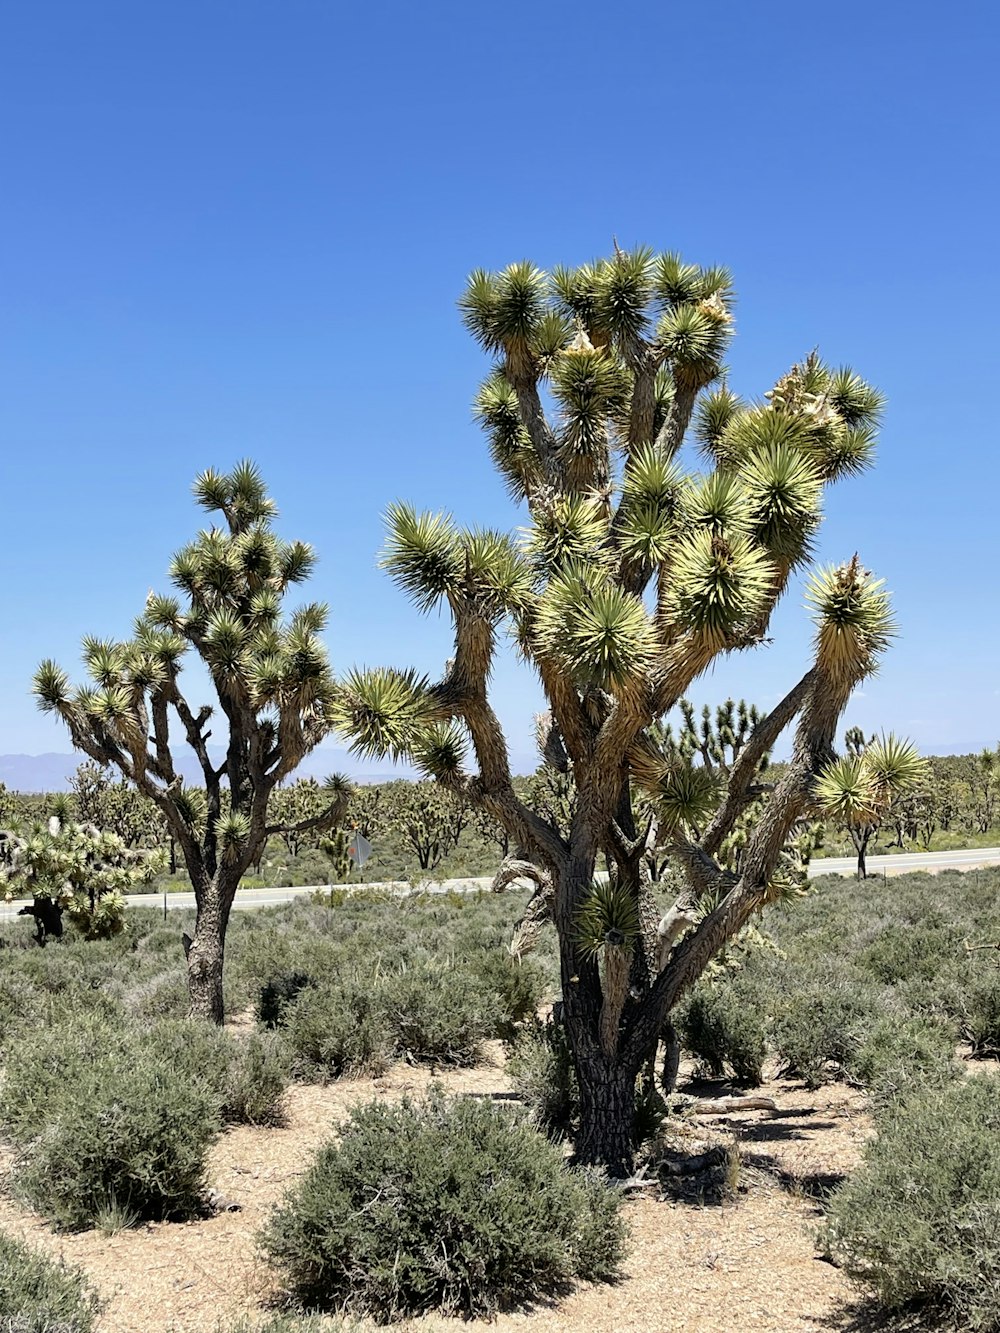 a large cactus tree in the middle of a desert